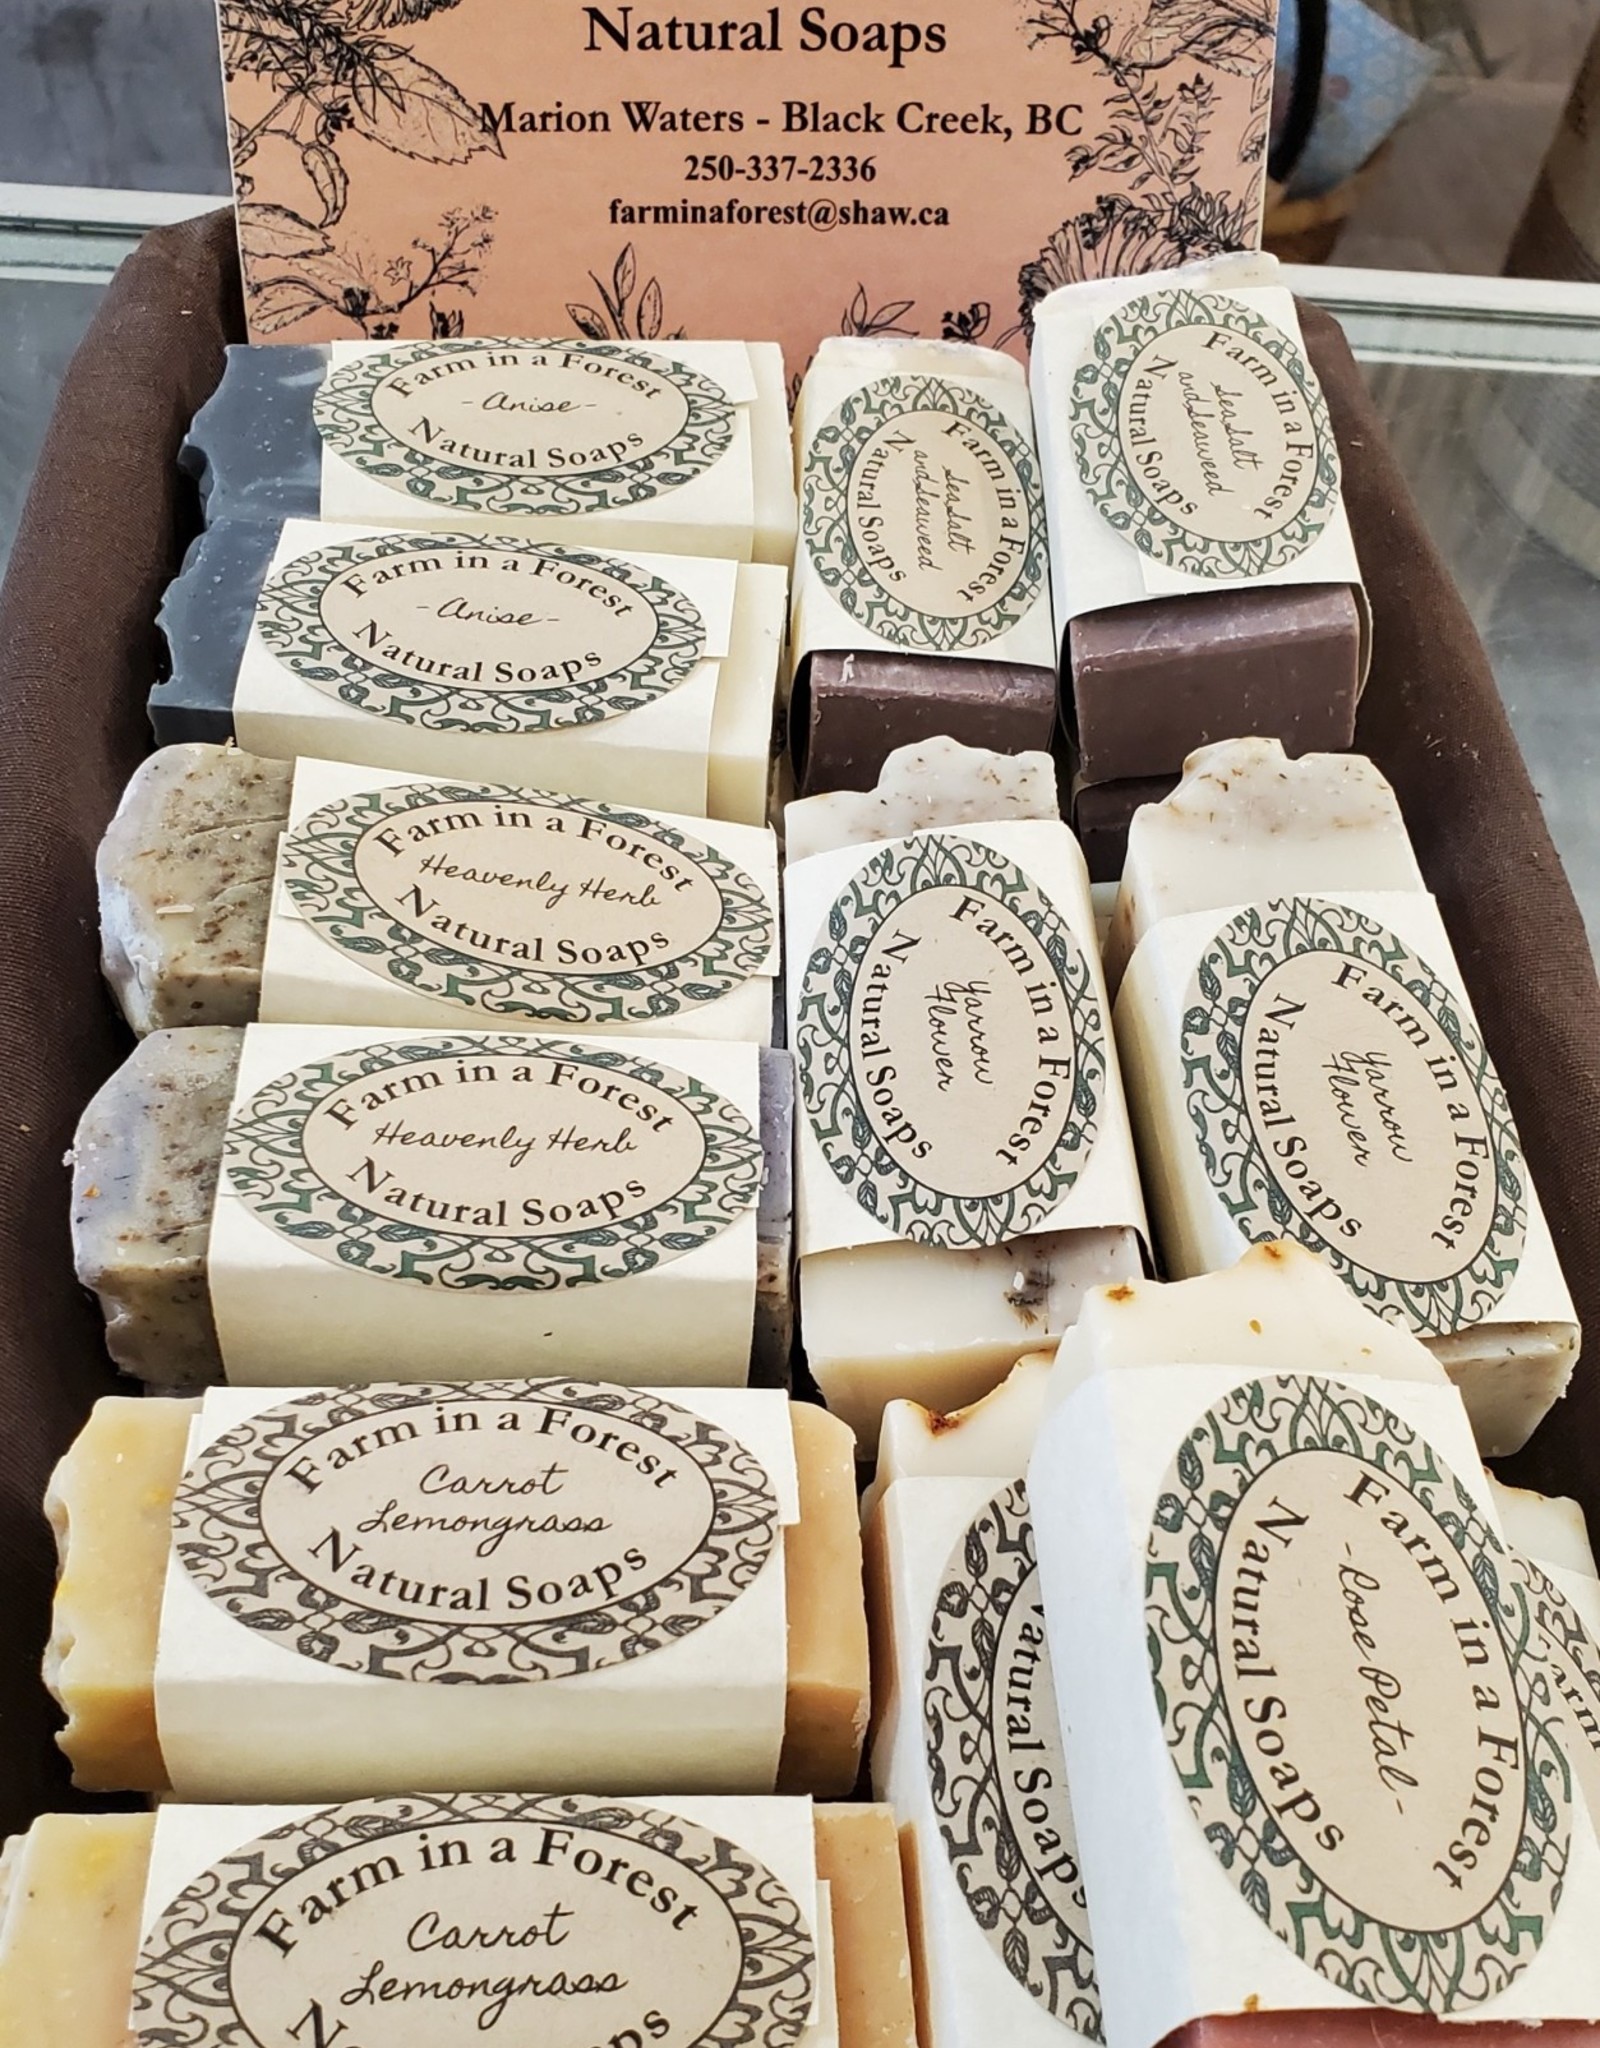 Farm in a Forest Soap